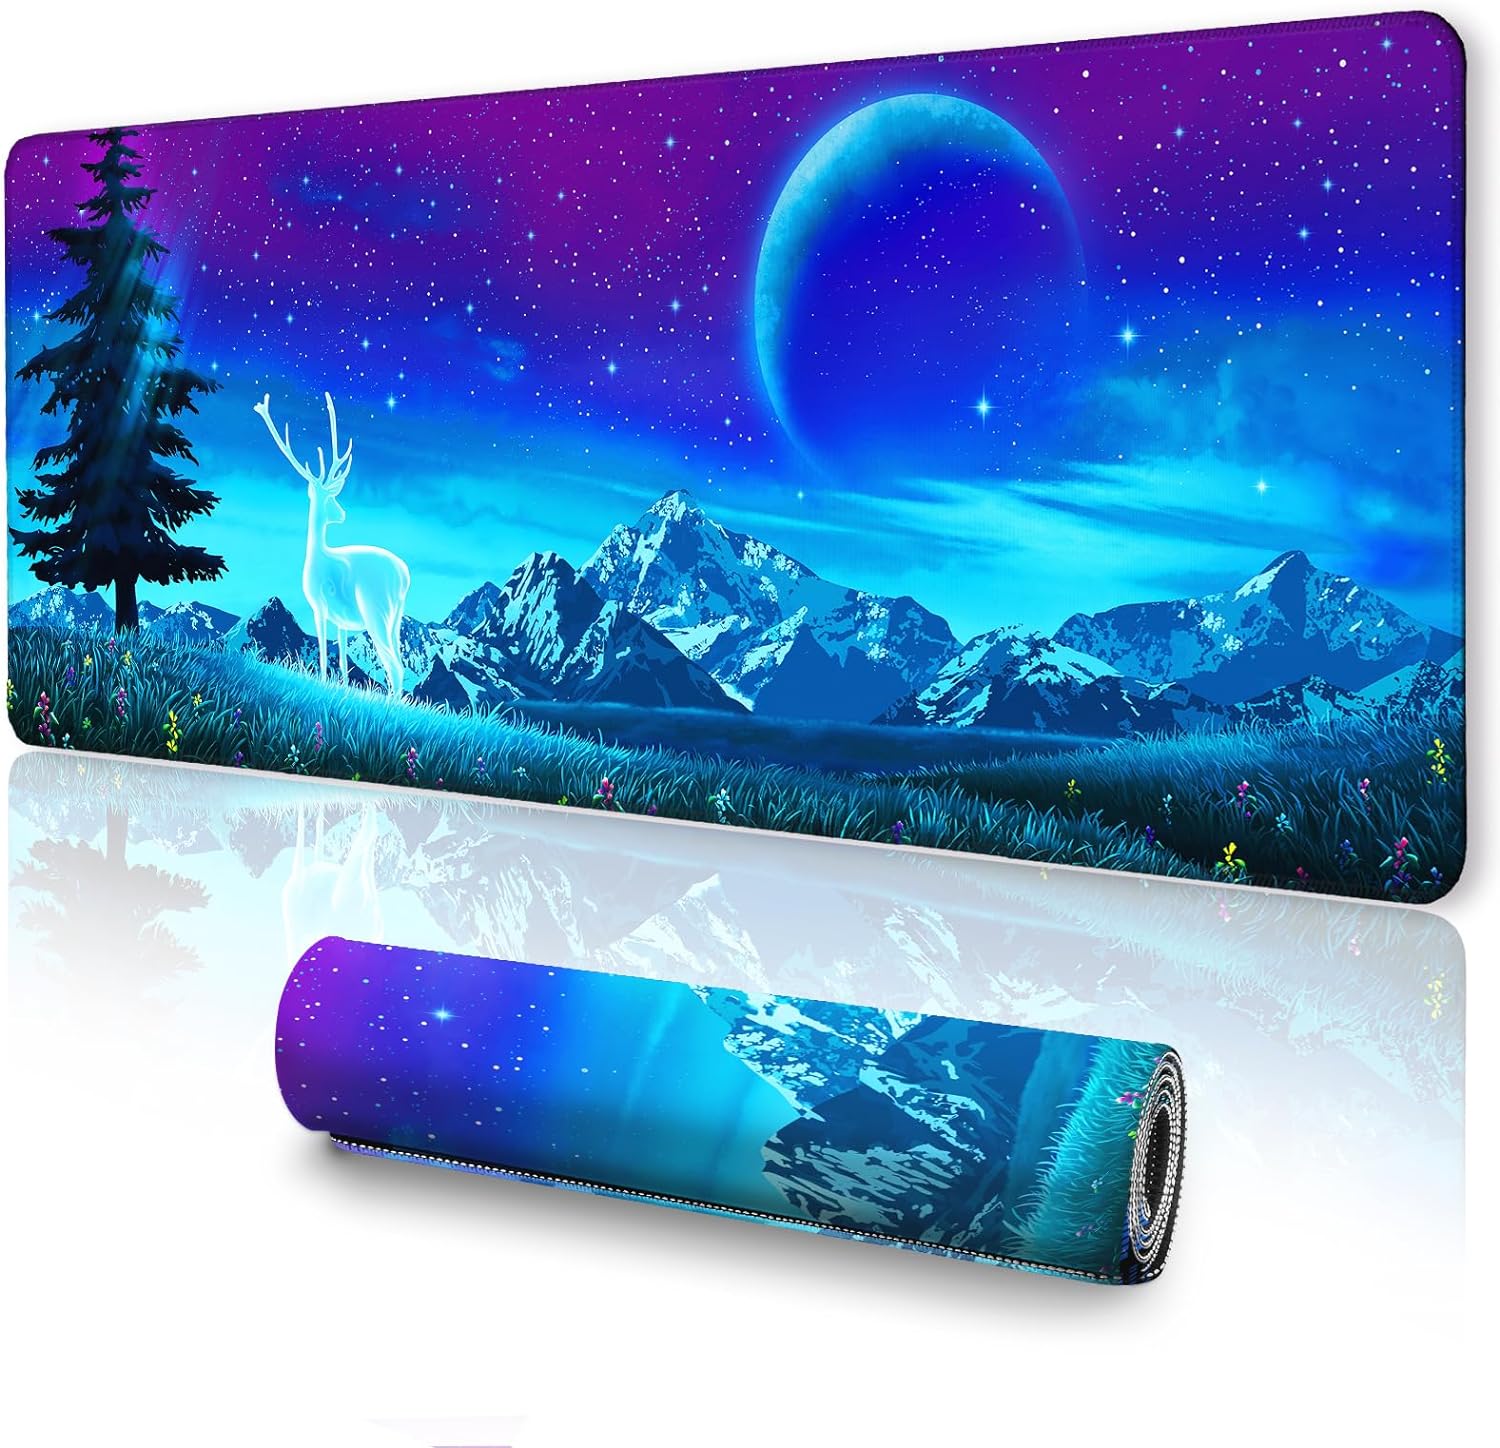 Gaming Mouse Pad, Large Mouse Pad, Keyboard and Mouse Pad, XL Mousepad, 31.5 x 11.8, Non-Slip Base Stitched Edge for Home Office Gaming Work, Galaxy Print Forest Moon Deer